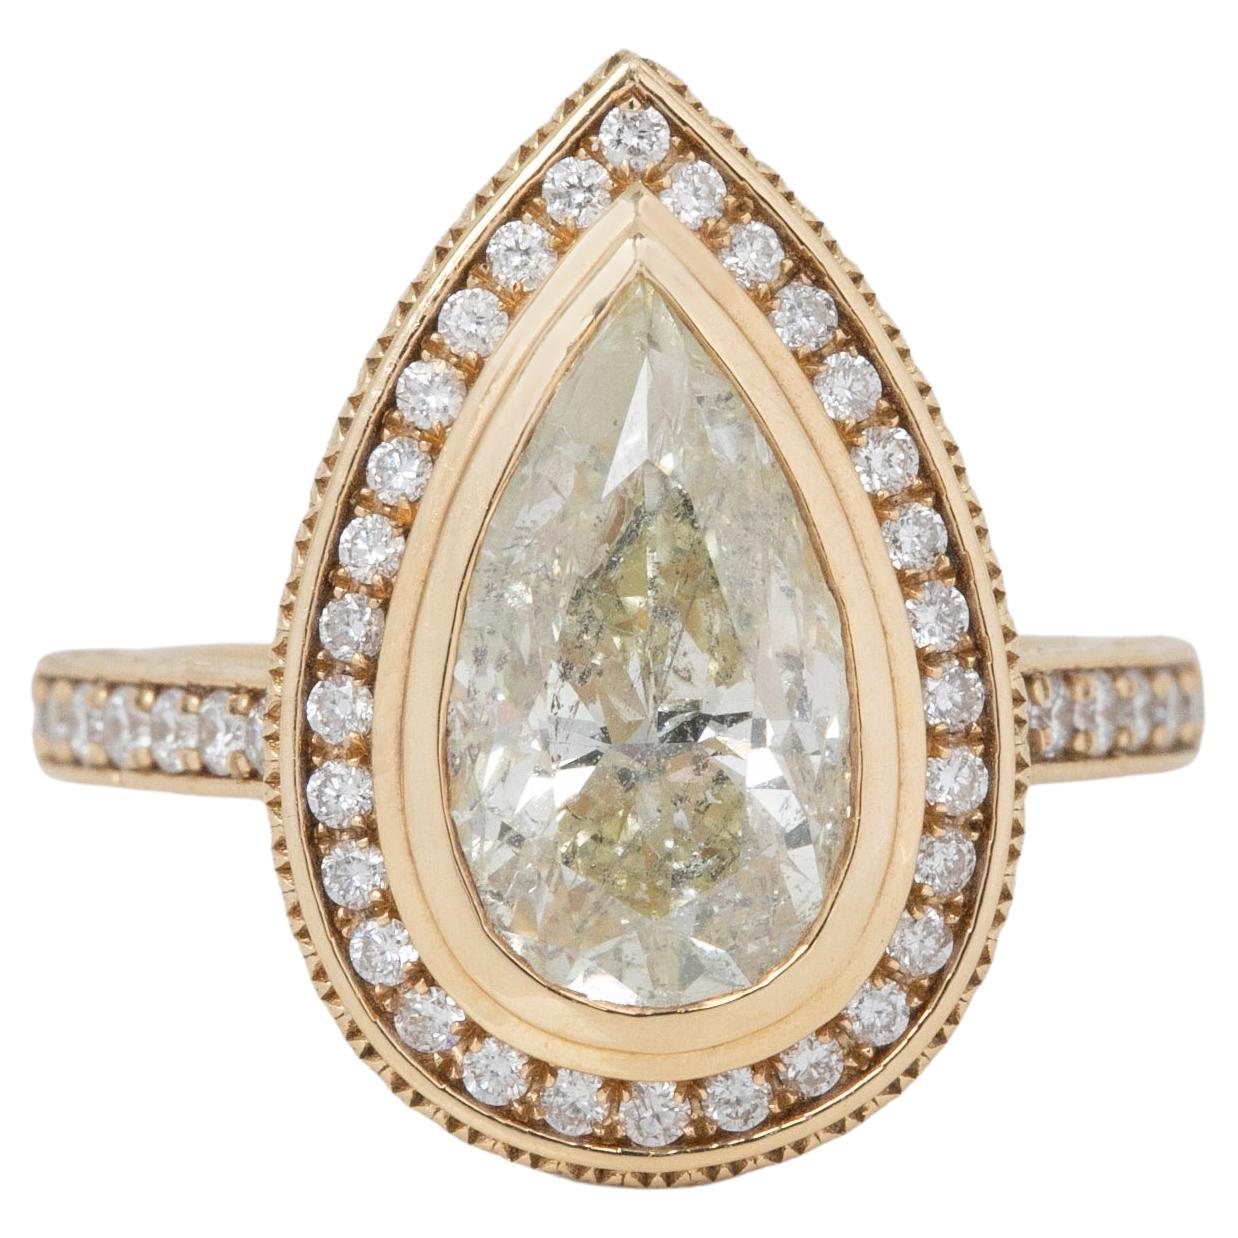 Vintage Ring 3.46 Carat Diamond Pear Drop Cut Big Stone and 14k Solid Gold Ring For Sale